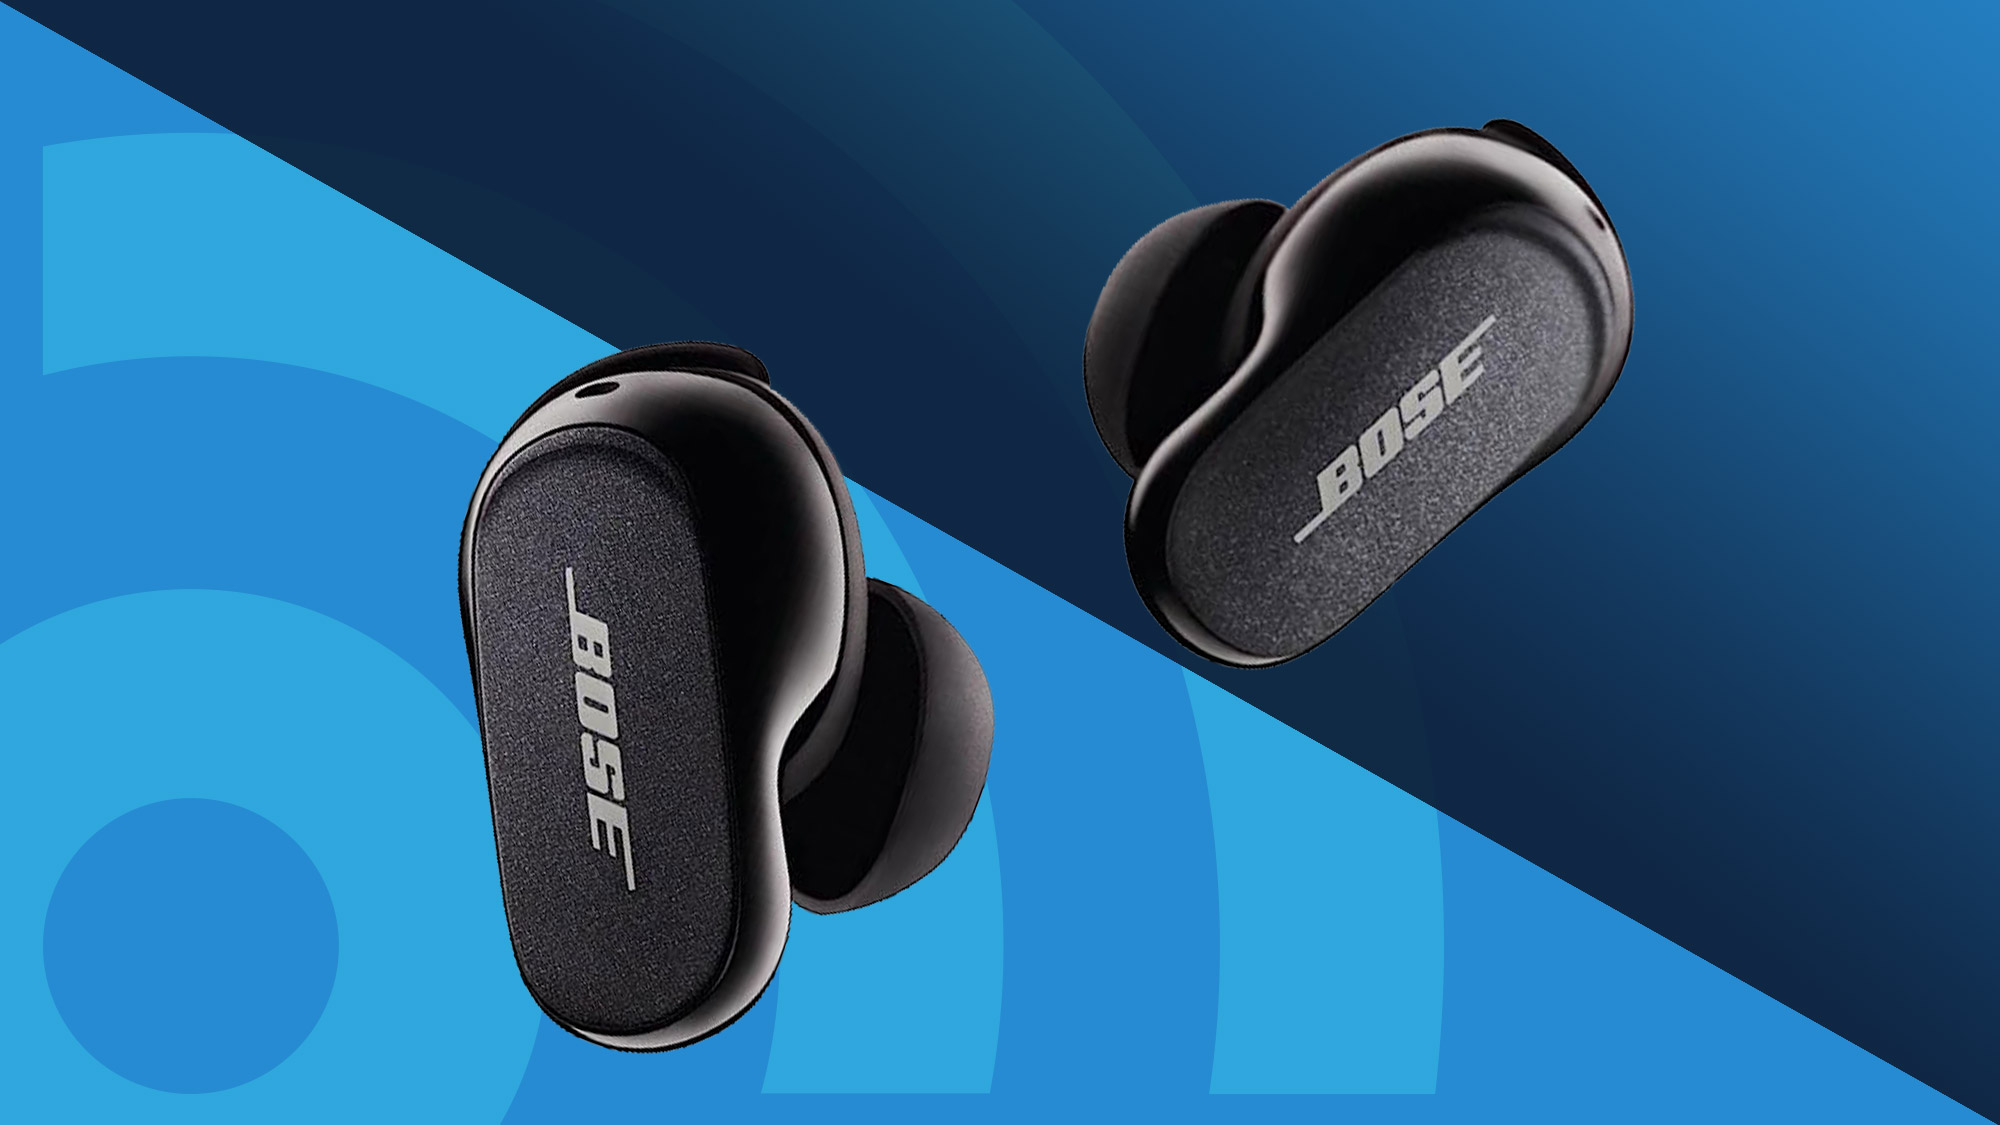 22 highly-rated noise-canceling headphones, wireless earbuds and